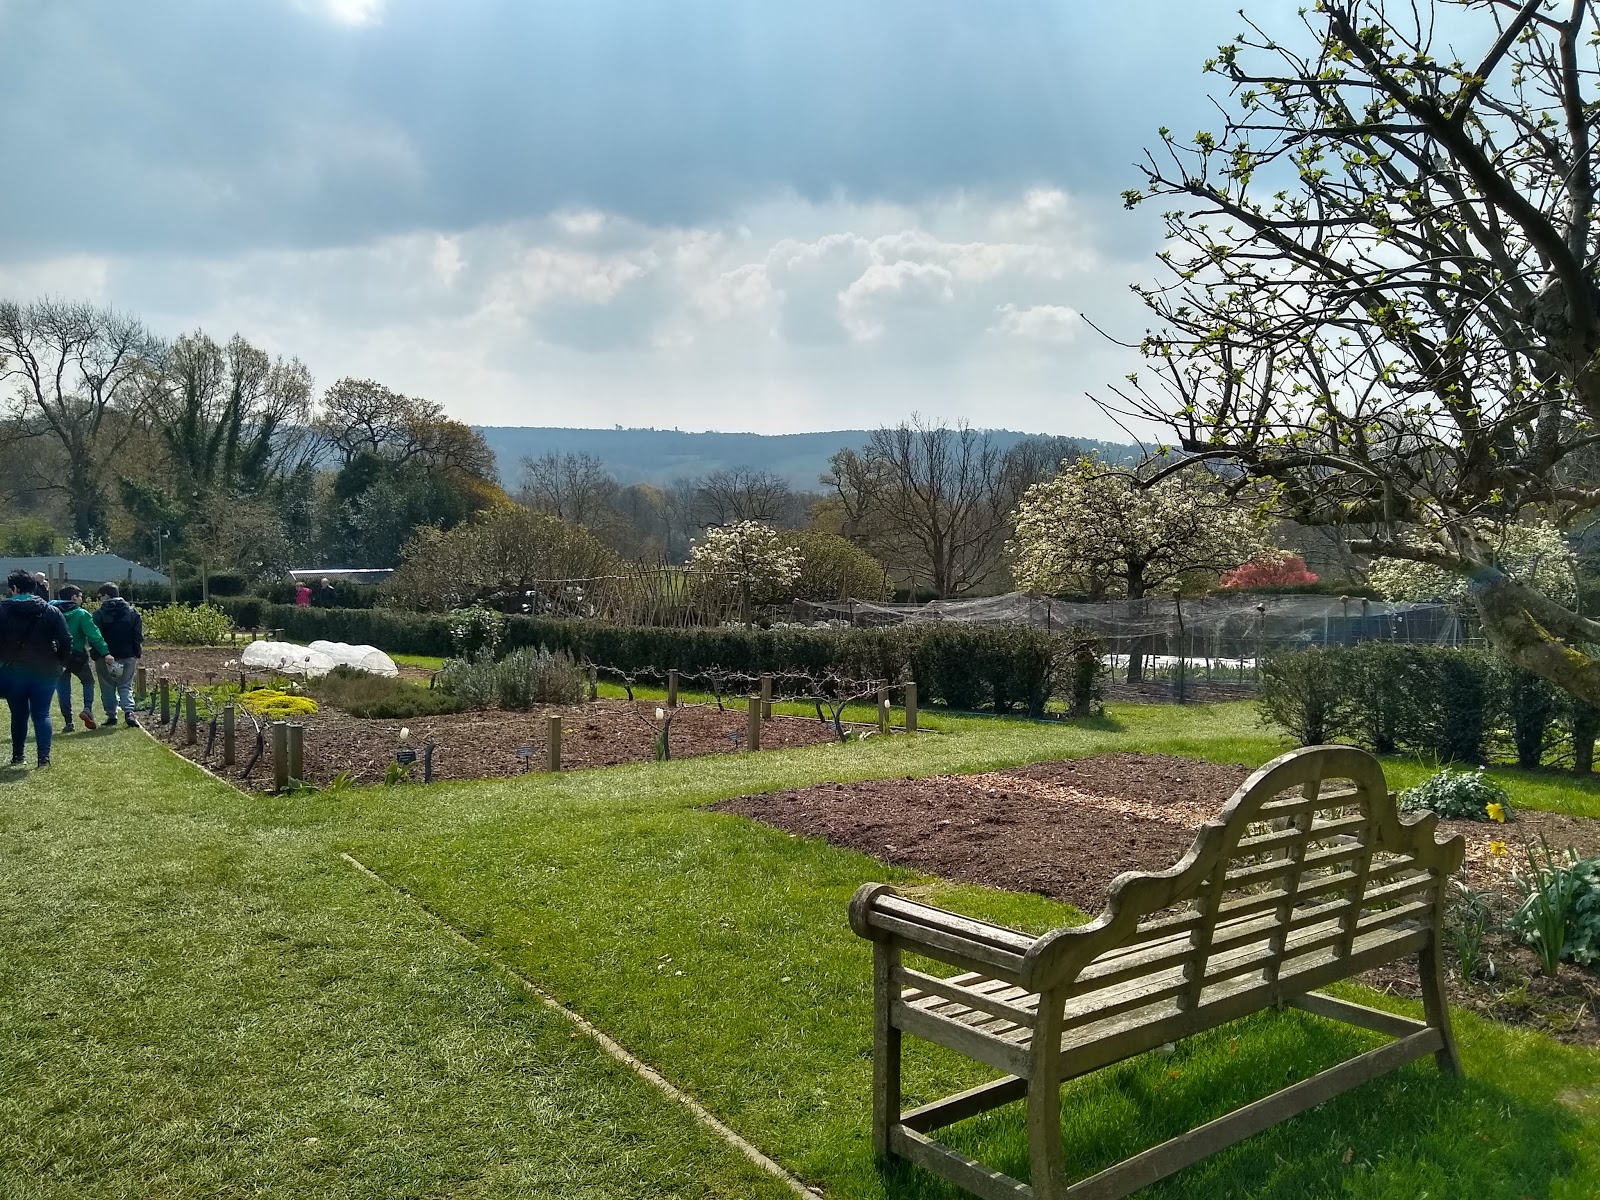 https://whatremovals.co.uk/wp-content/uploads/2022/02/National Trust - Standen House and Garden-300x225.jpeg